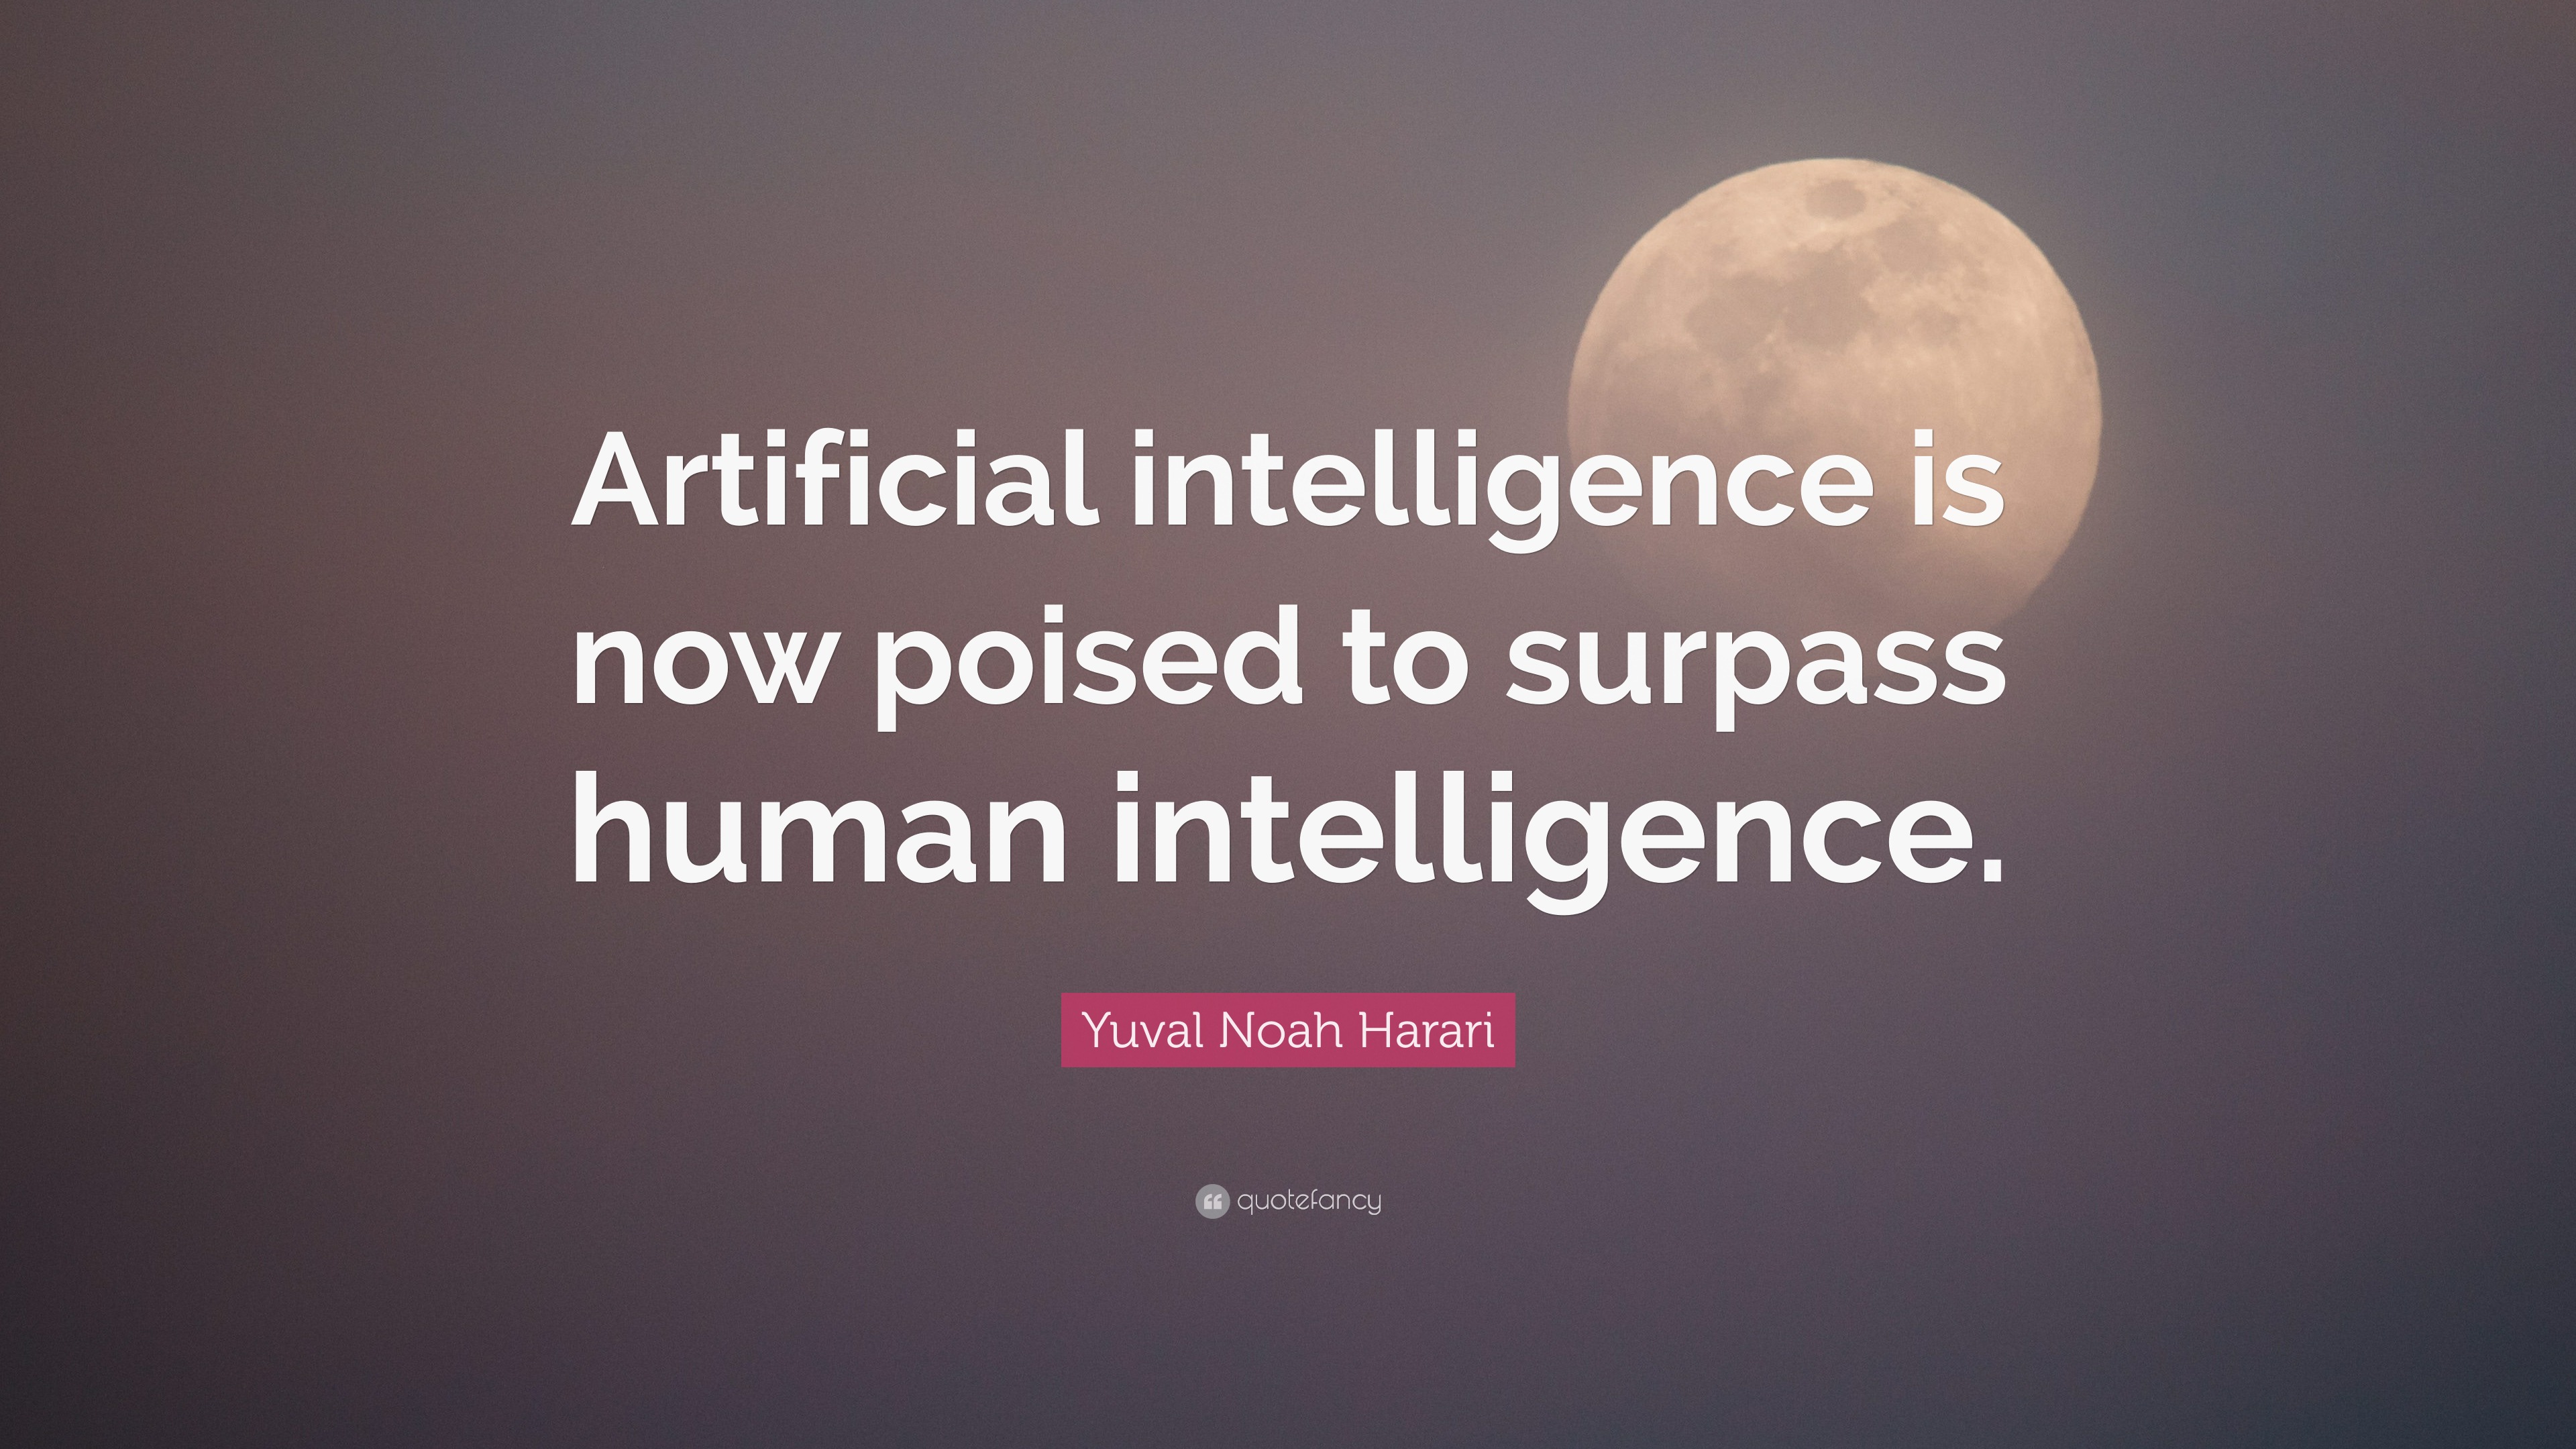 Yuval Noah Harari Quote: “Artificial intelligence is now poised to ...